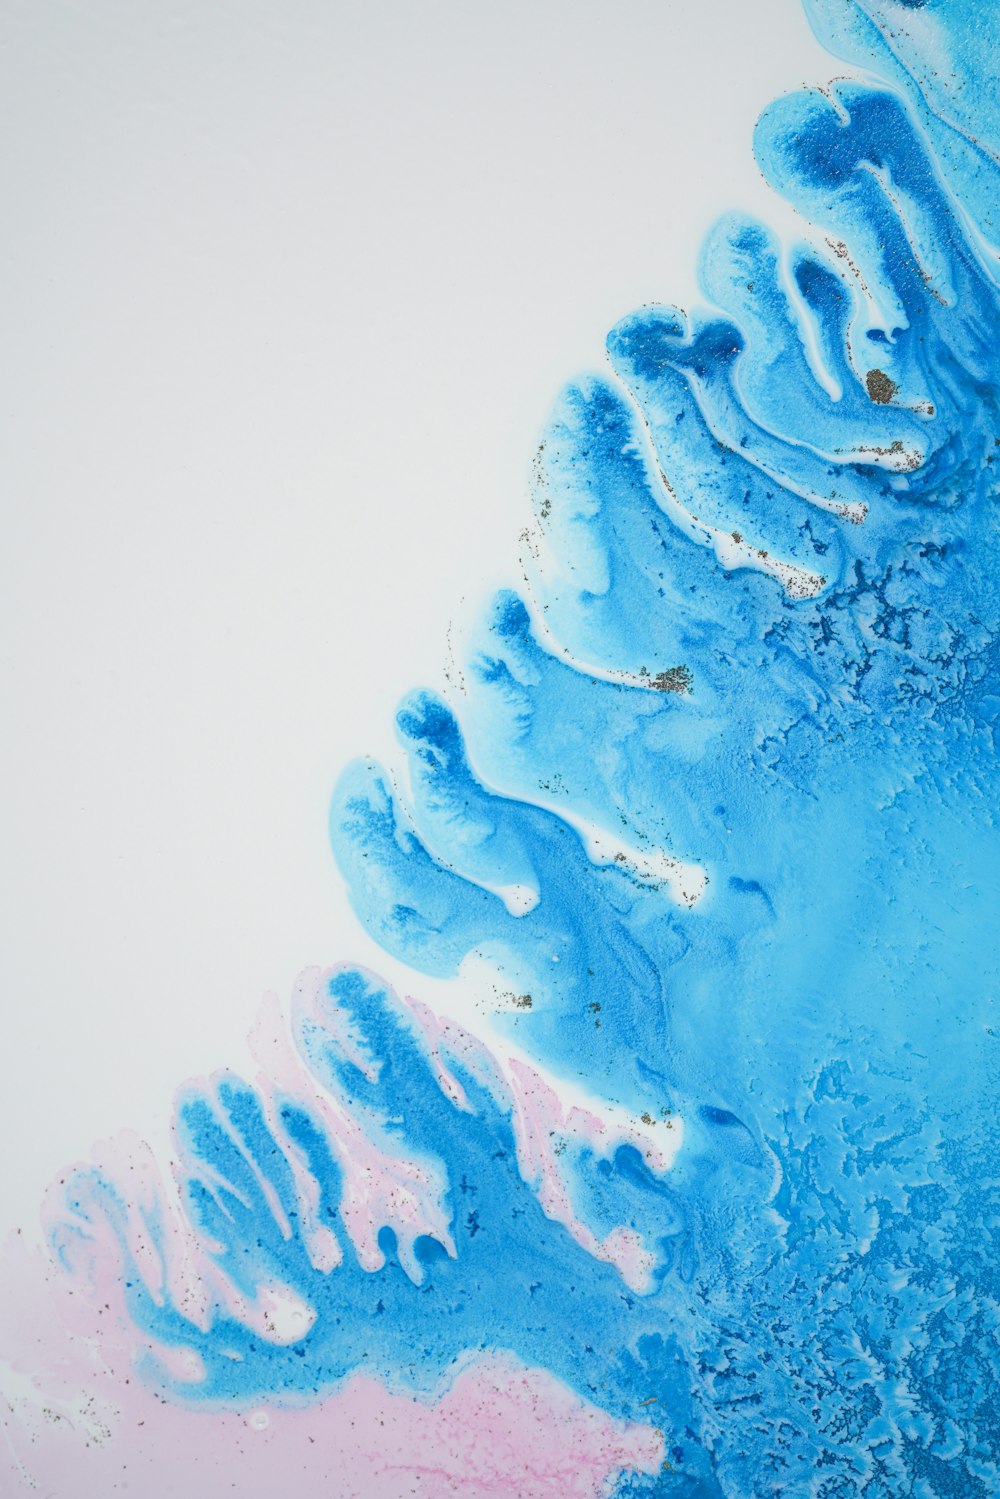 a close up of blue and pink paint on a white surface